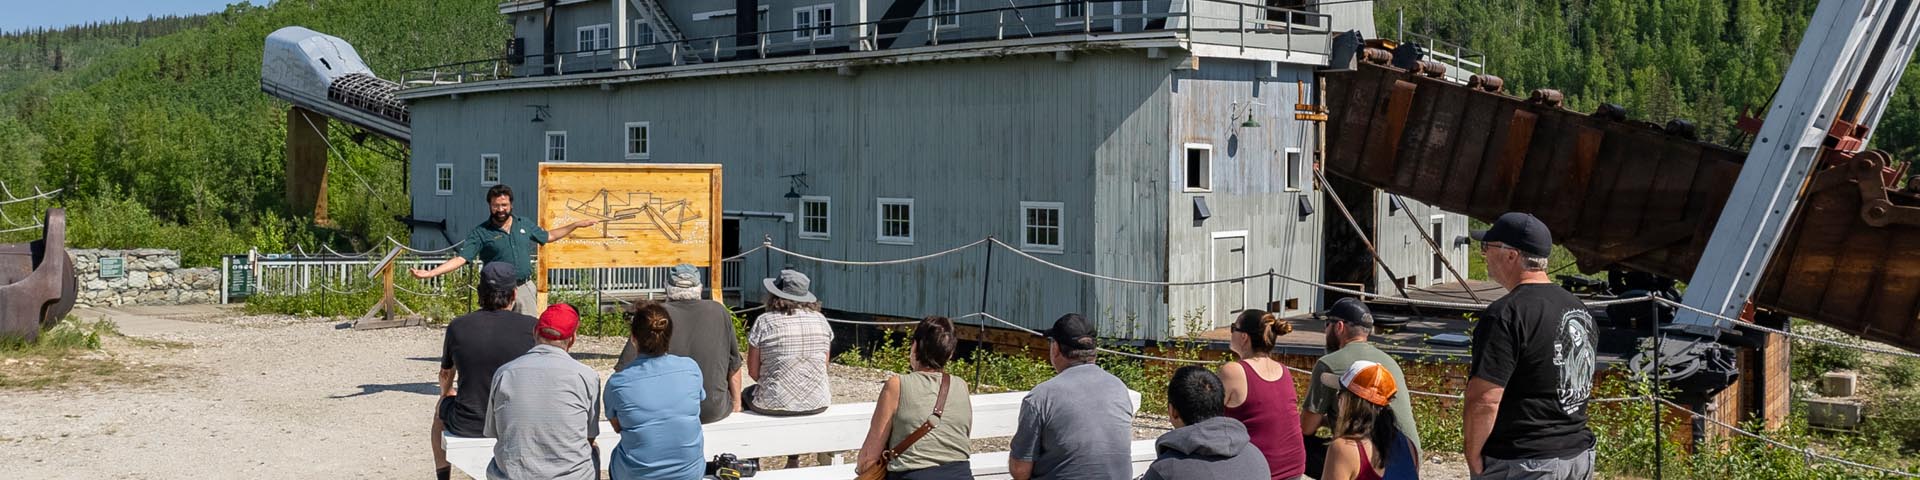 A guide with visitors in front of the dredge at Dredge No. 4 National Historic Site.